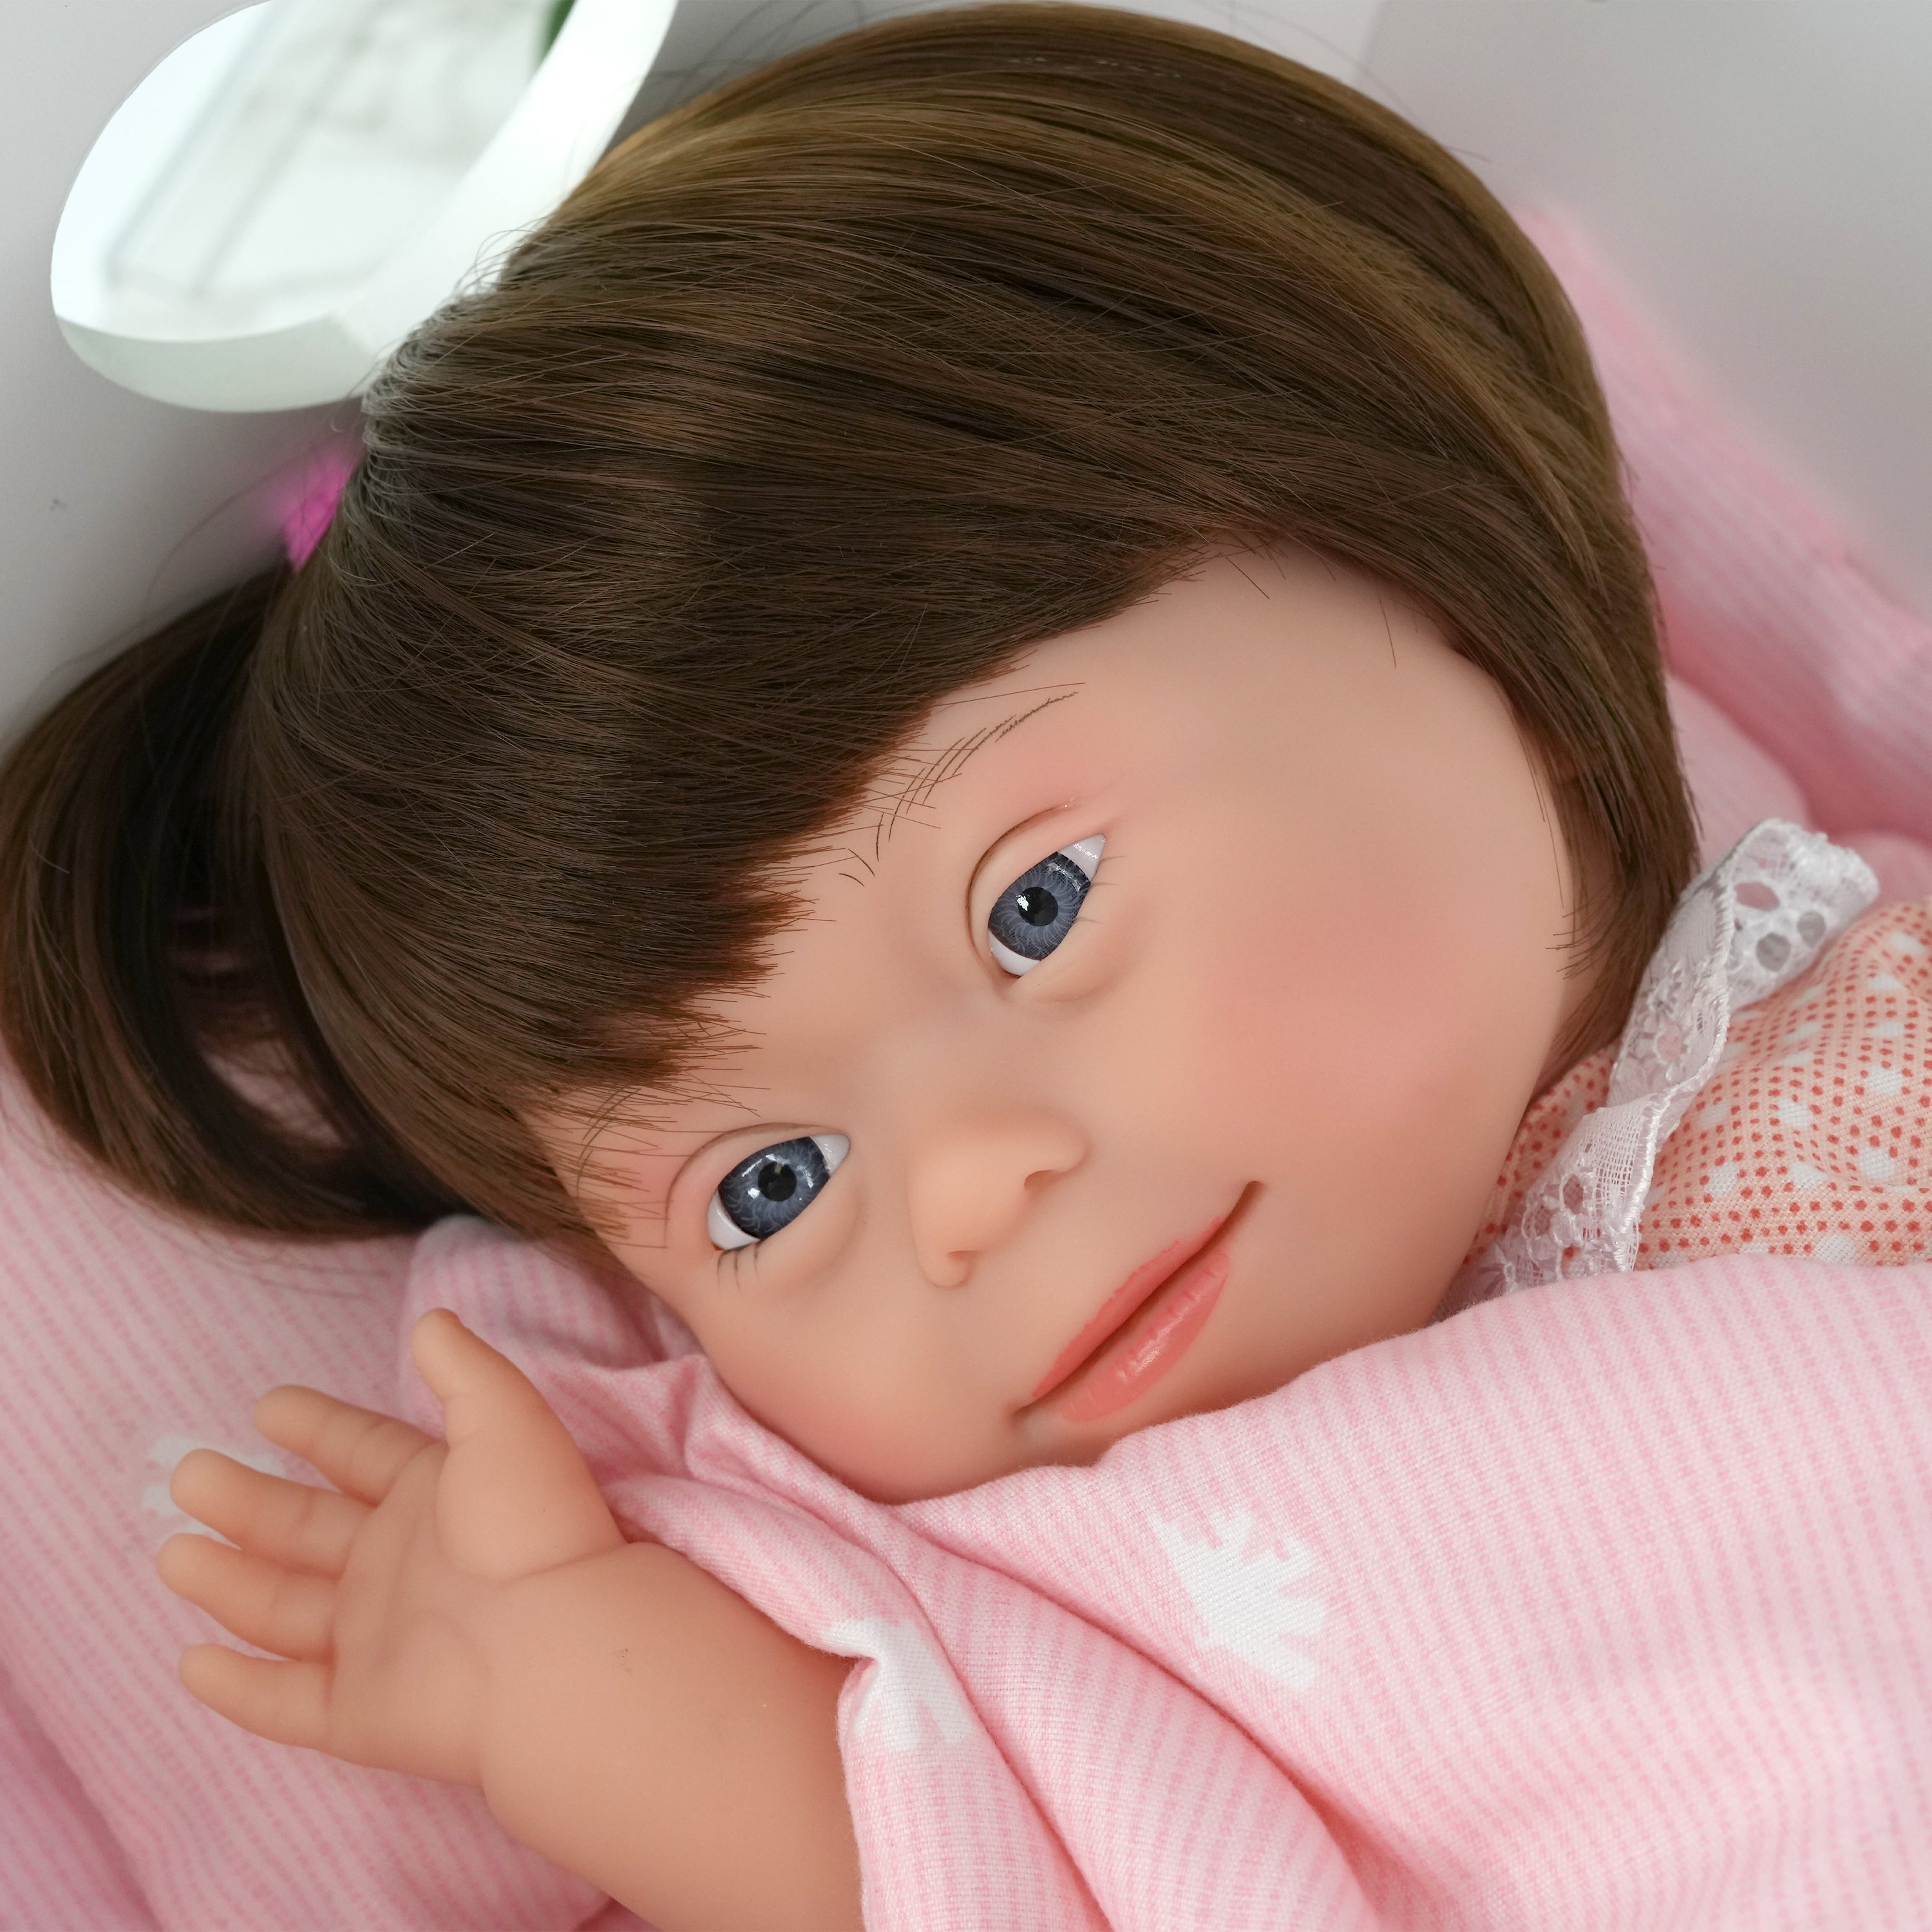 Brown Hair Girl Baby Doll with Down Syndrome BiBi Doll - The Magic Toy Shop